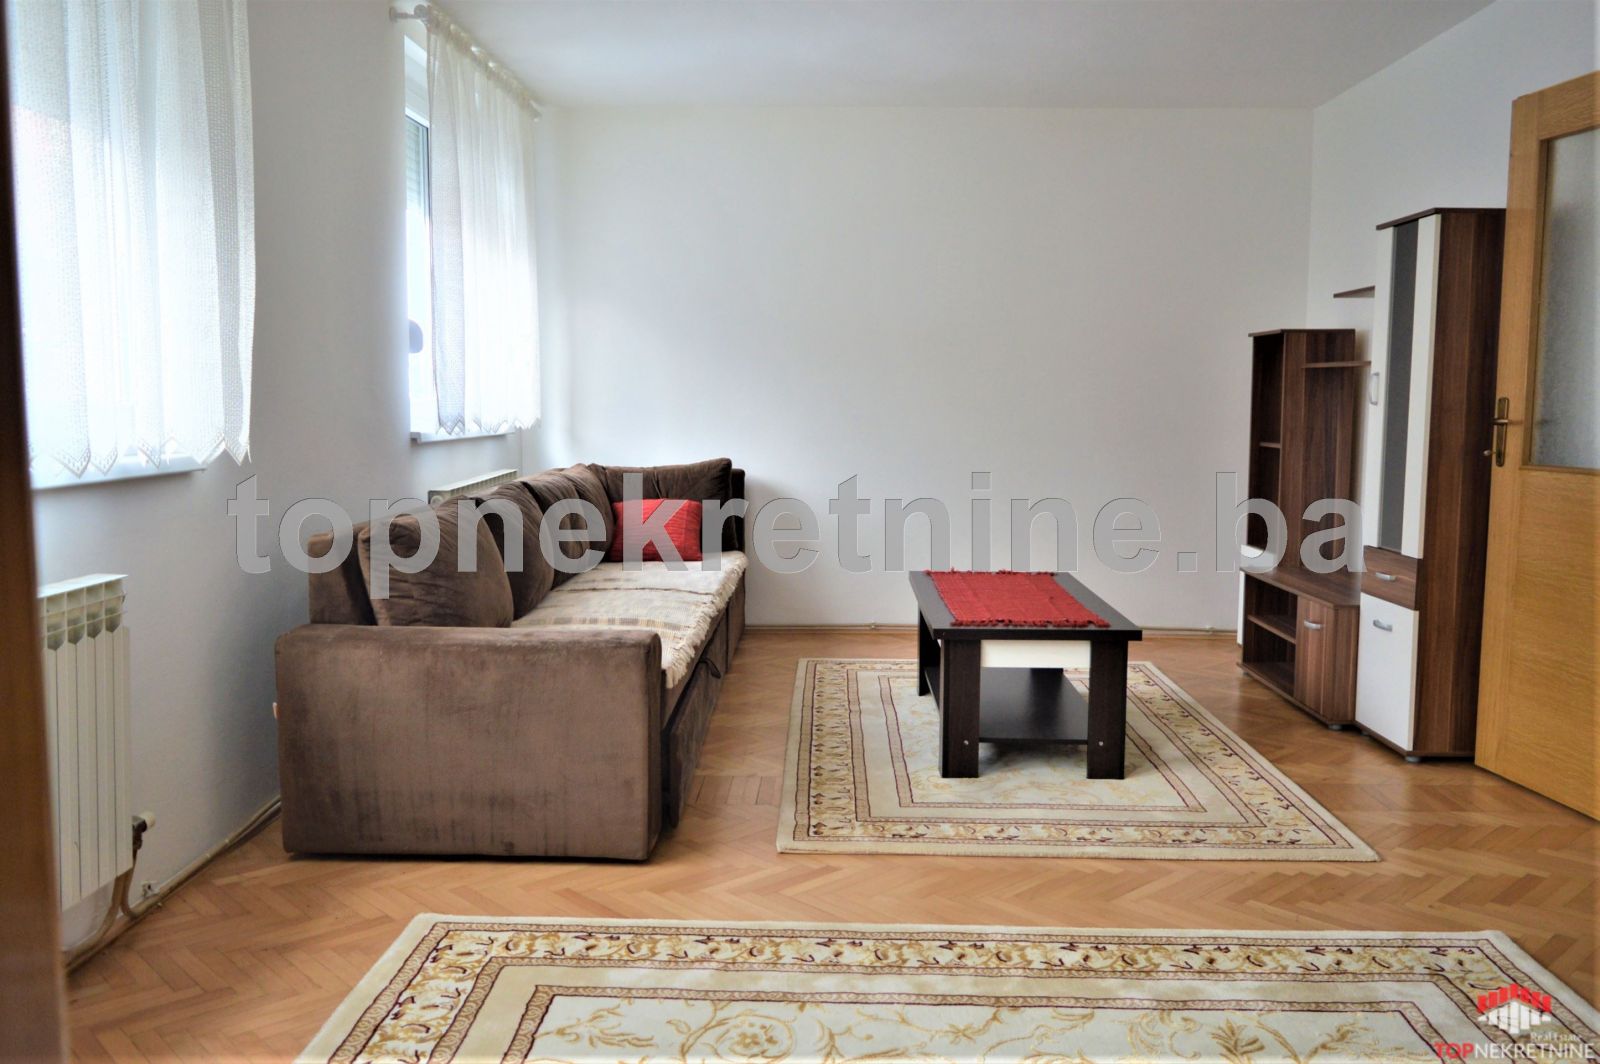 Fully renovated 2BDR apartment with 89 SqM, with 2 balconies, and parking space, Pejton, Ilidza